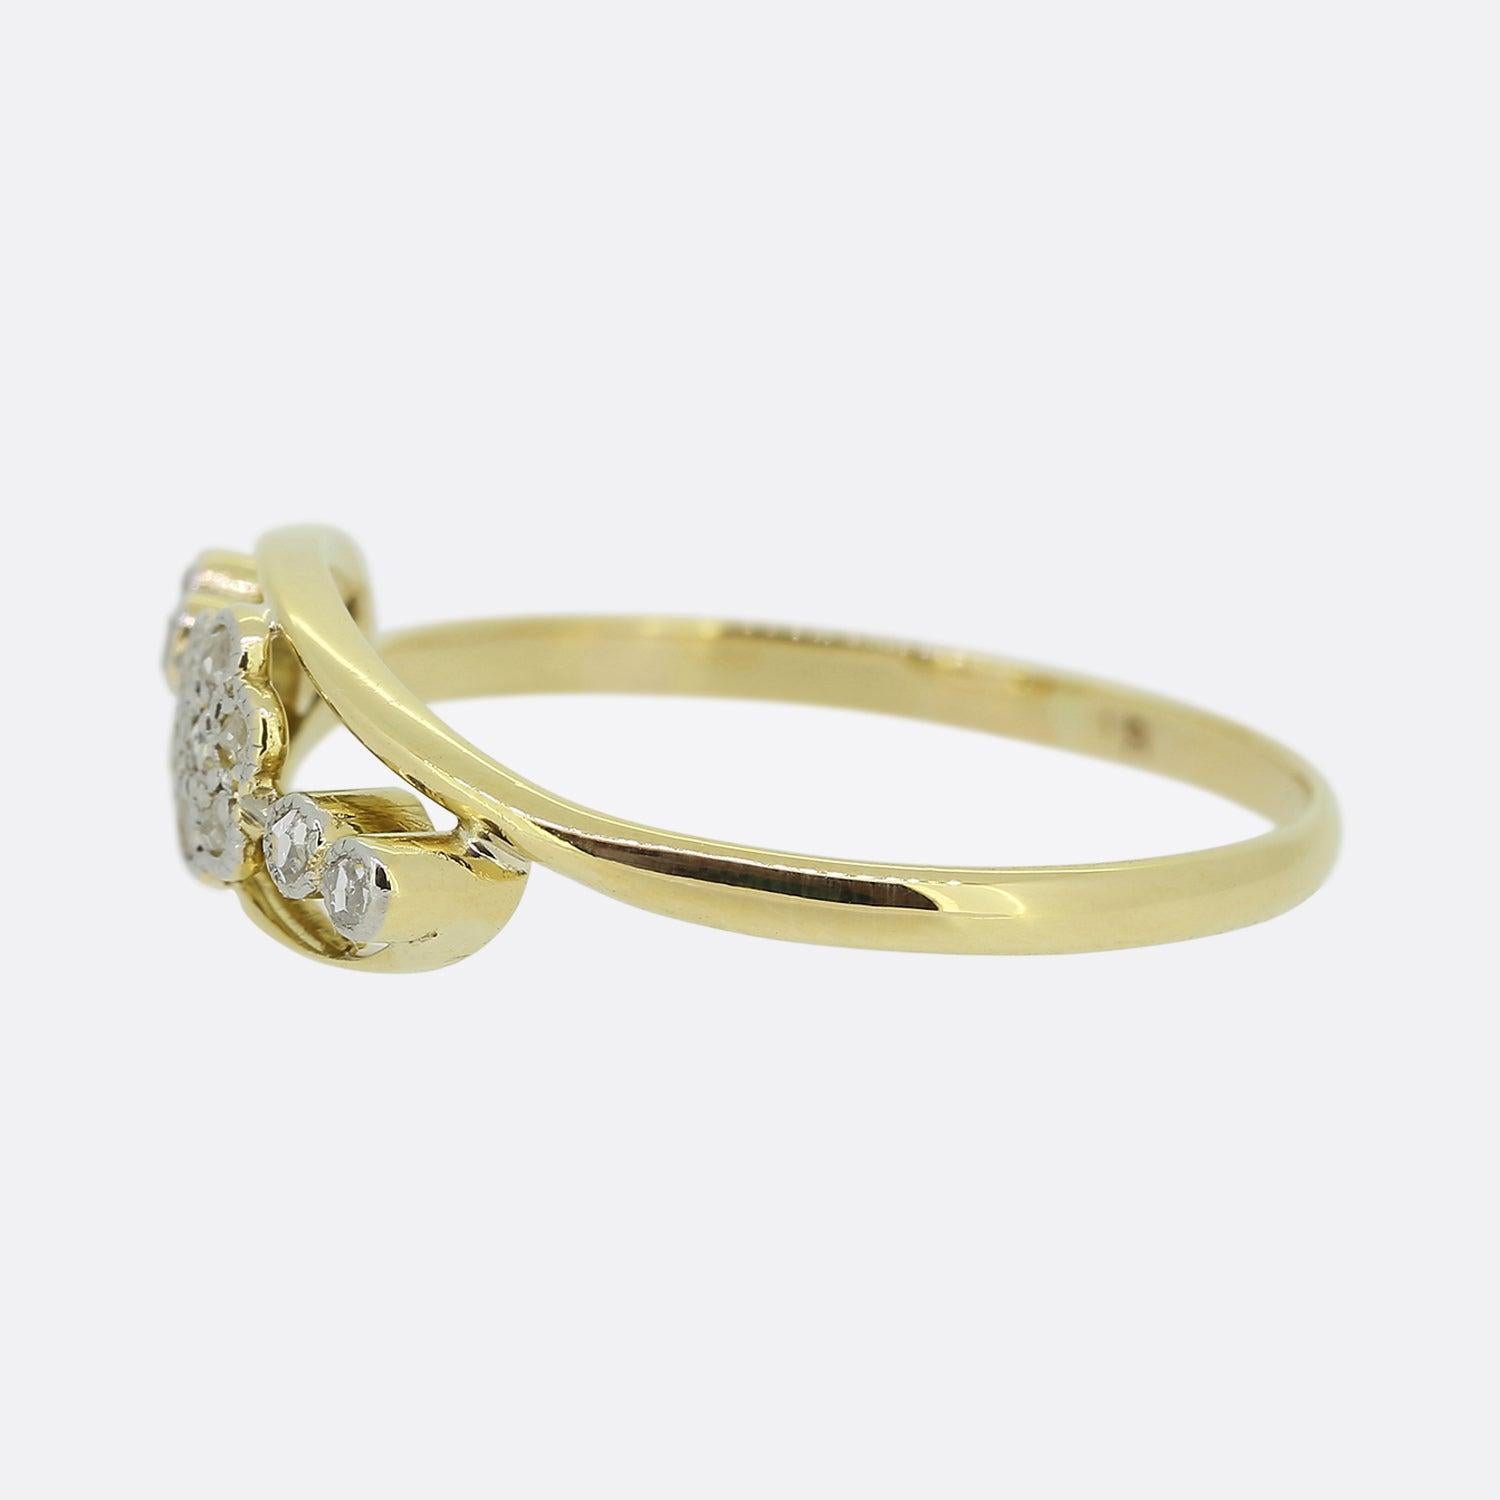 Here we have an elegant 18ct yellow gold diamond ring. An open frame plays host to a cluster of platinum milgrain set rose cut diamonds collectively forming a flower motif. This floral design is flanked on either side by an additional duo of rose